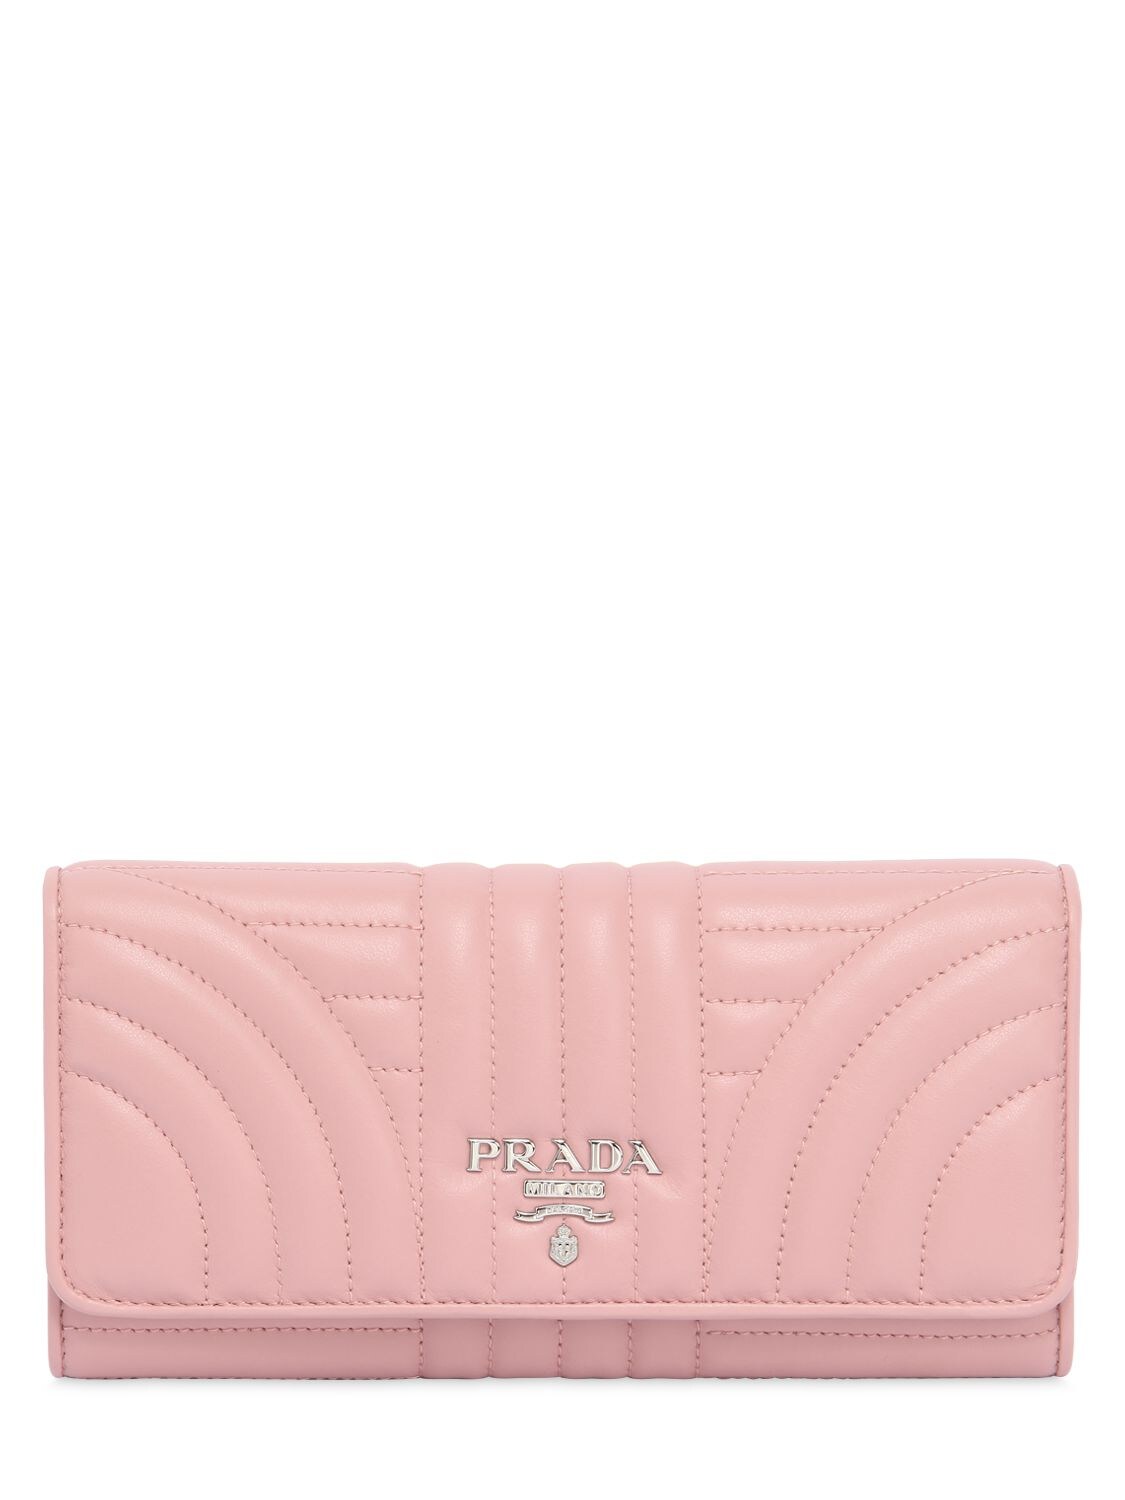 PRADA QUILTED LEATHER CONTINENTAL WALLET,67IIUX040-RJA5MJQ1